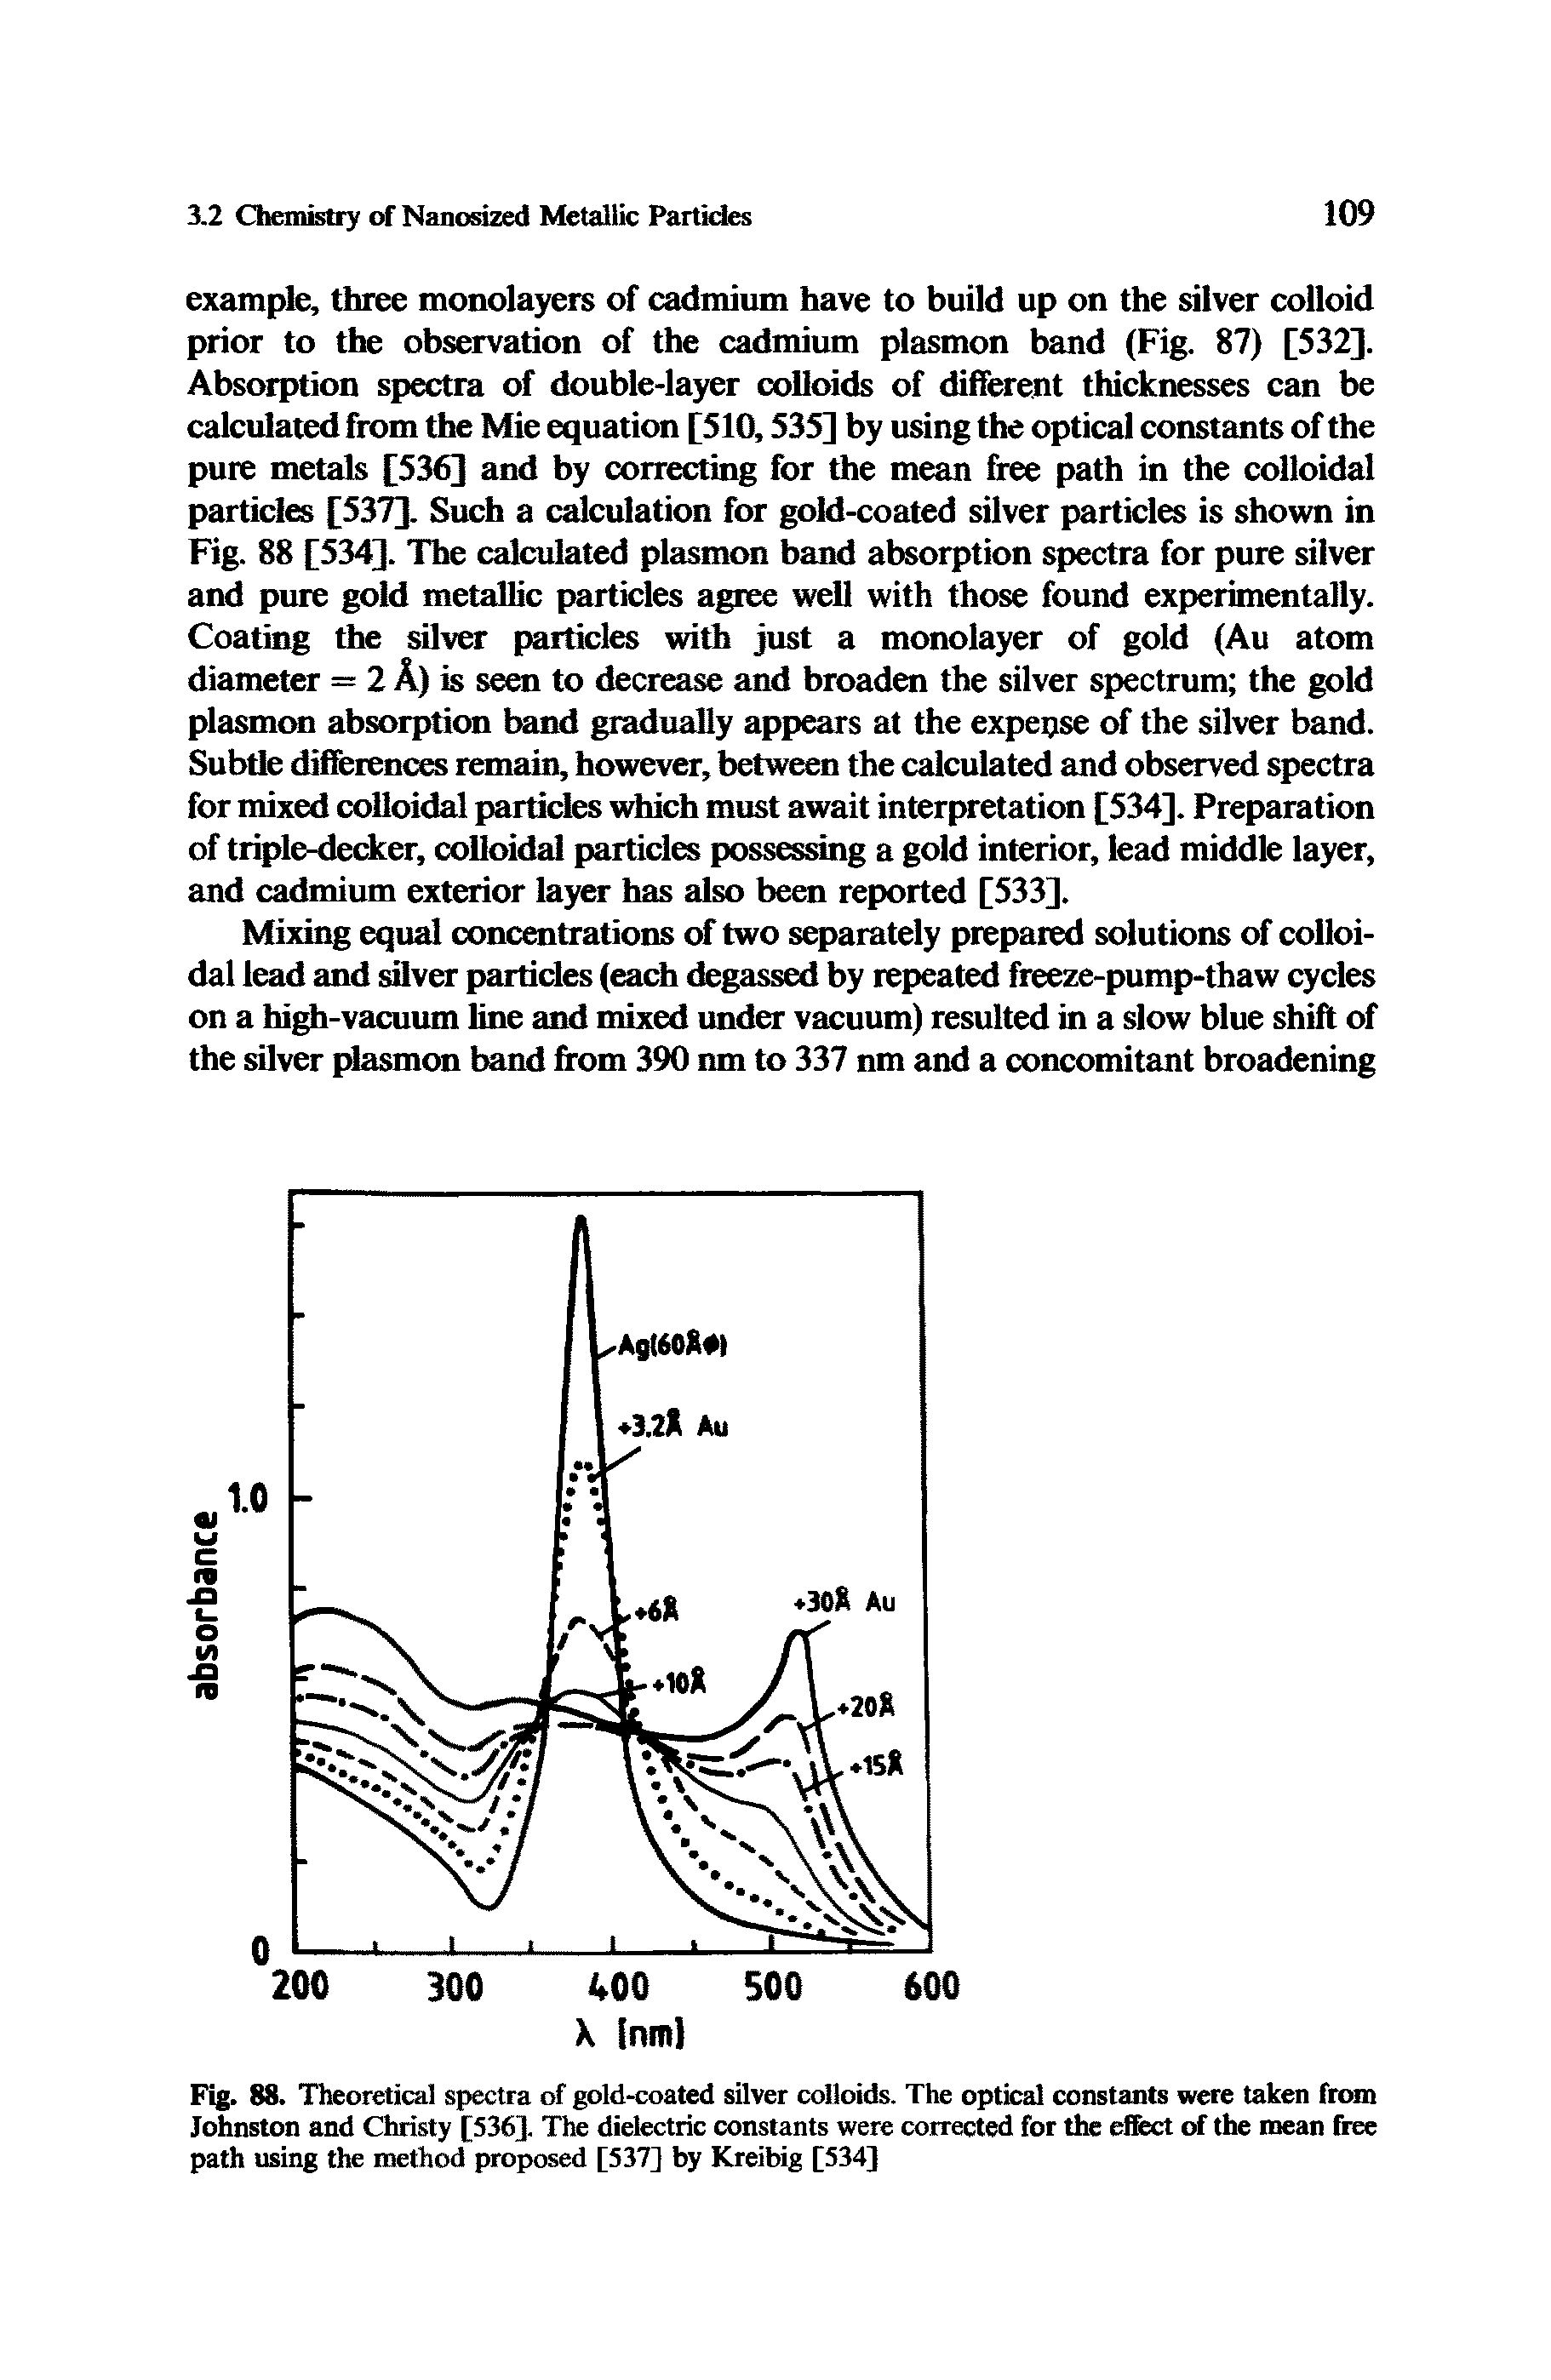 Fig. 88. Theoretical spectra of gold-coated silver colloids. The optical constants were taken from Johnston and Christy [536], The dielectric constants were corrected for the effect of the mean free path using the method proposed [537] by Kreibig [534]...